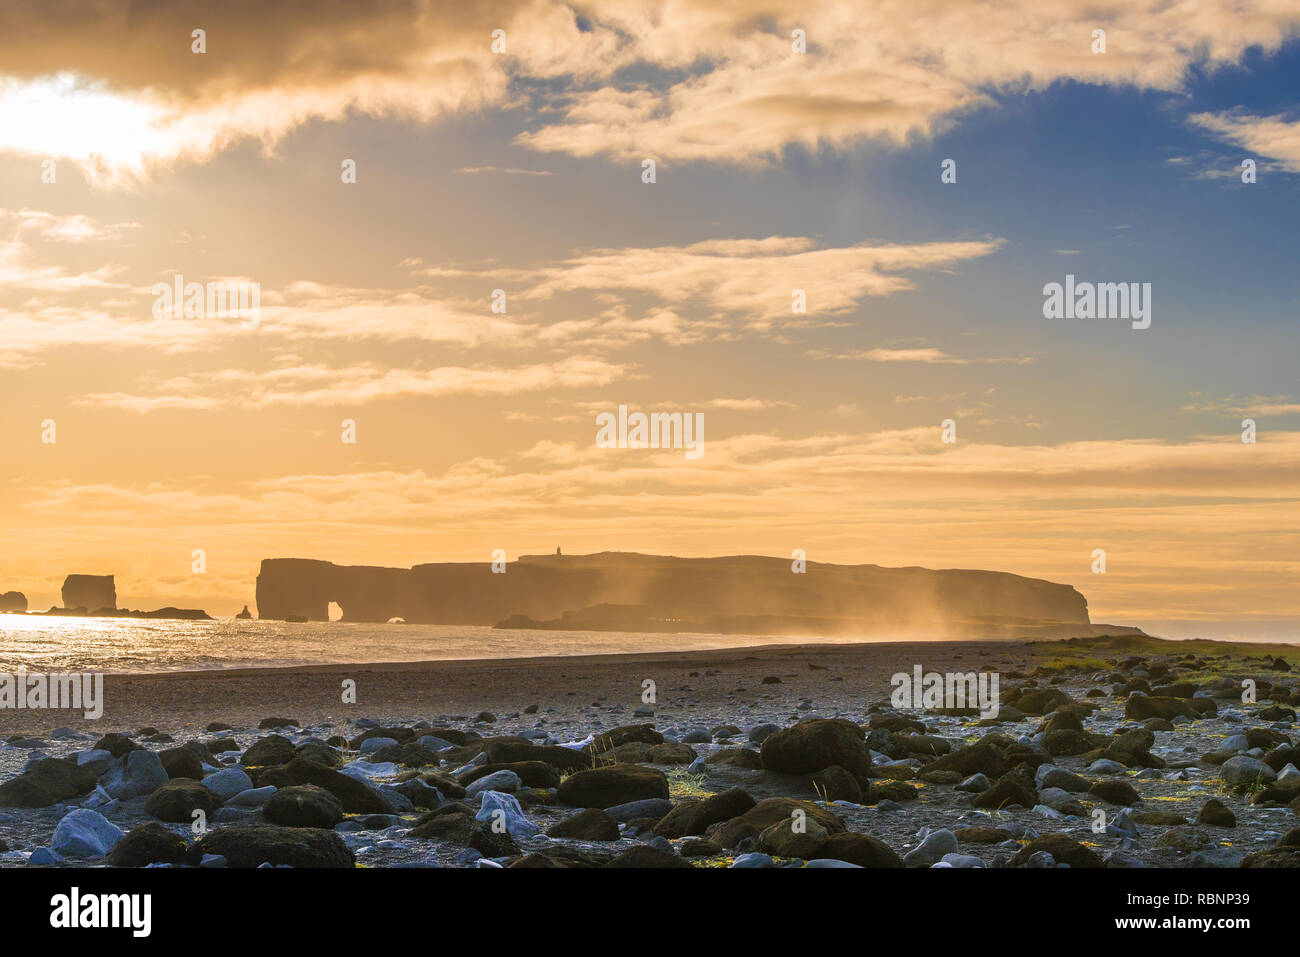 big flat rock in the ocean with surge in foreground in sunset mood Stock Photo